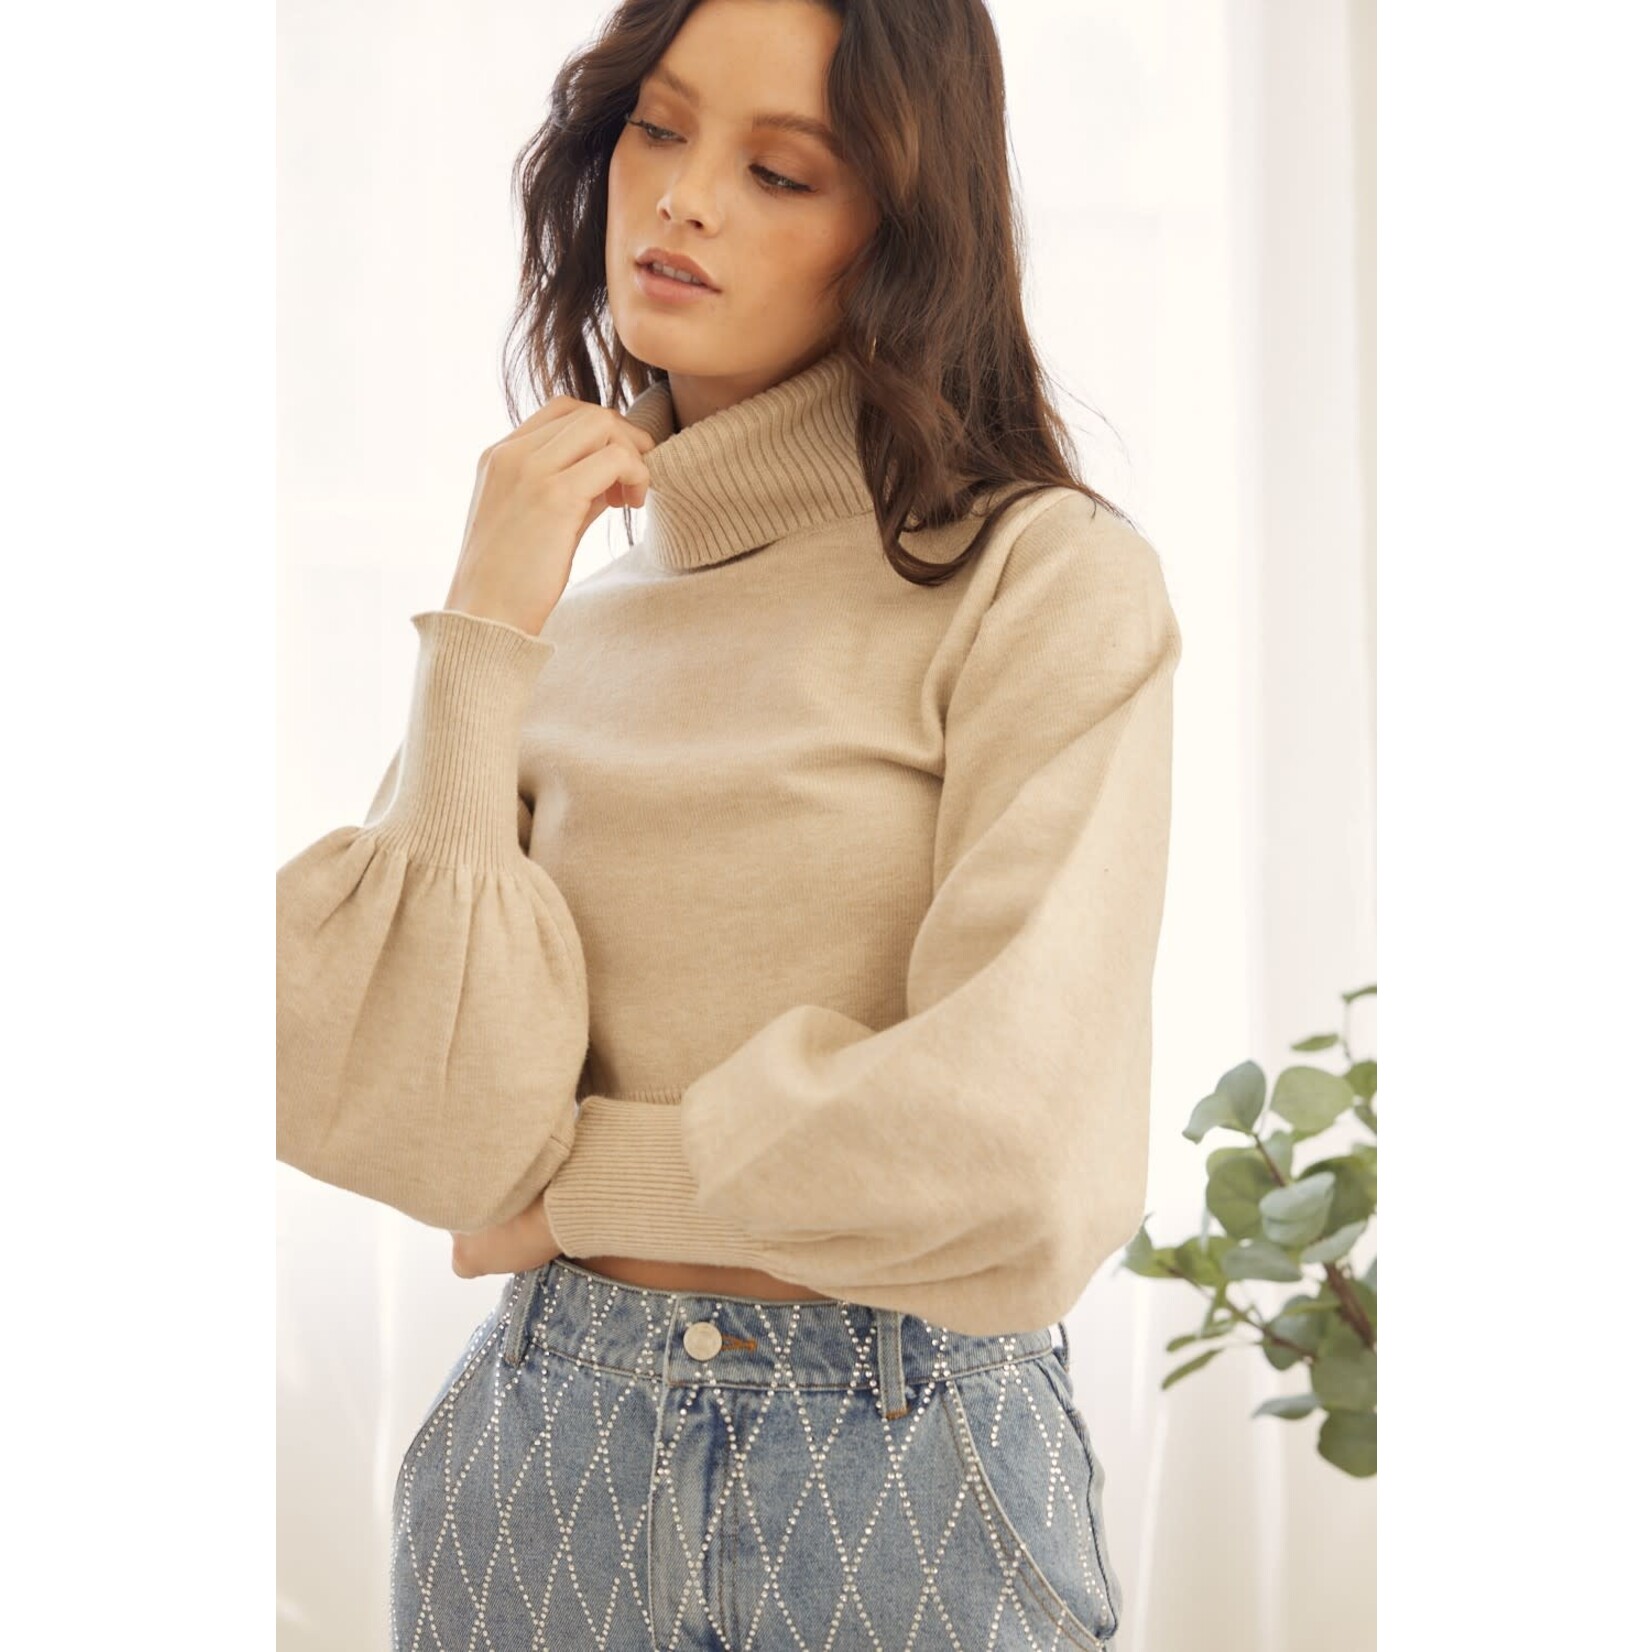 Idem Ditto Cropped Turtleneck Sweater